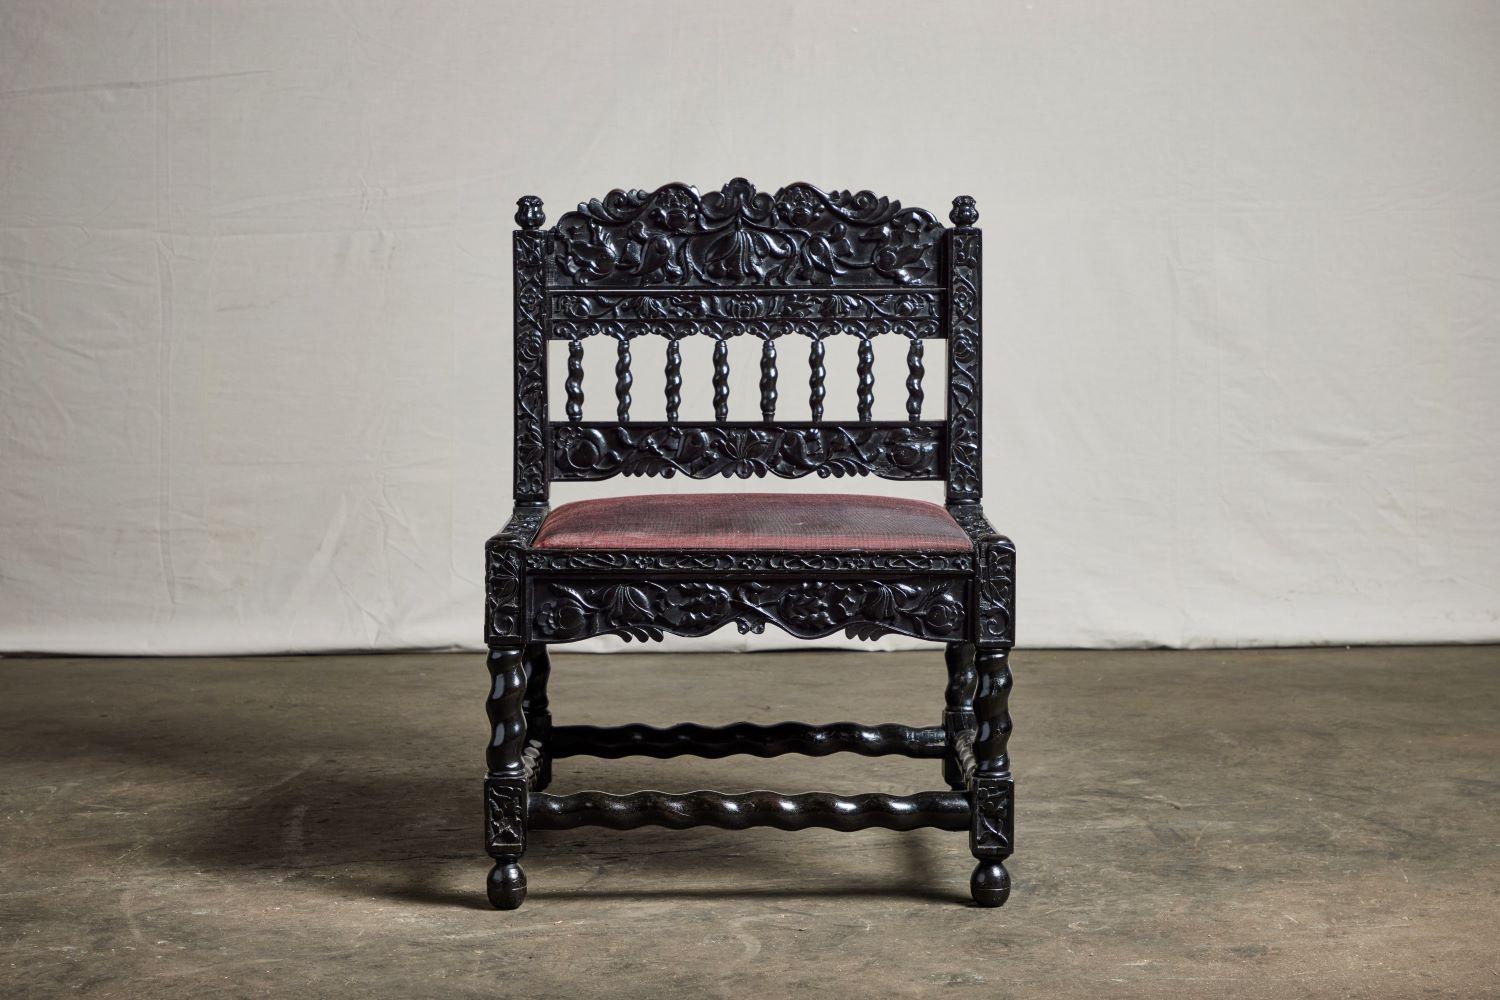 Dutch Colonial Ebony side chairs from the late 17th/Early 18th Century.